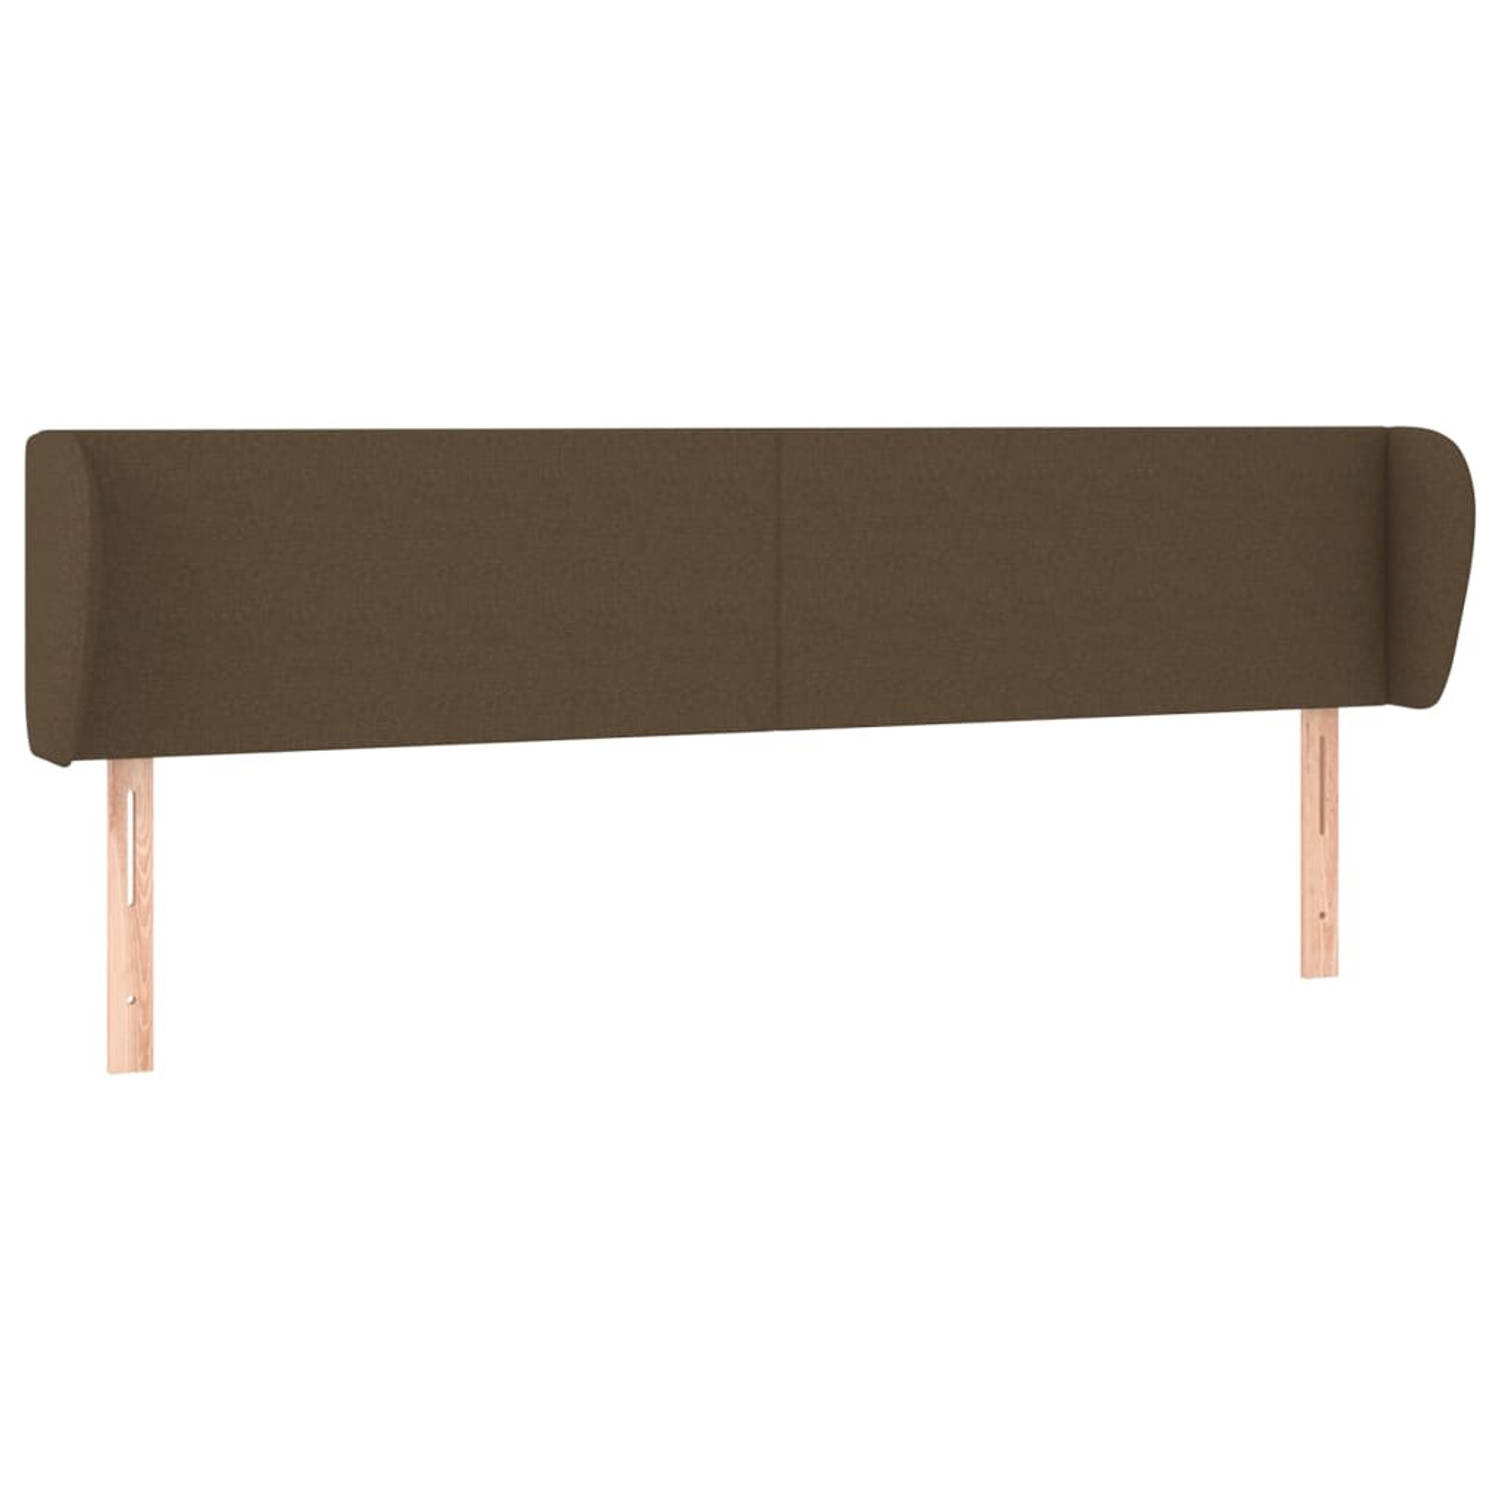 The Living Store Hoofdbord - Classic - Bedaccessoire - 203x23x78/88 cm - Donkerbruin